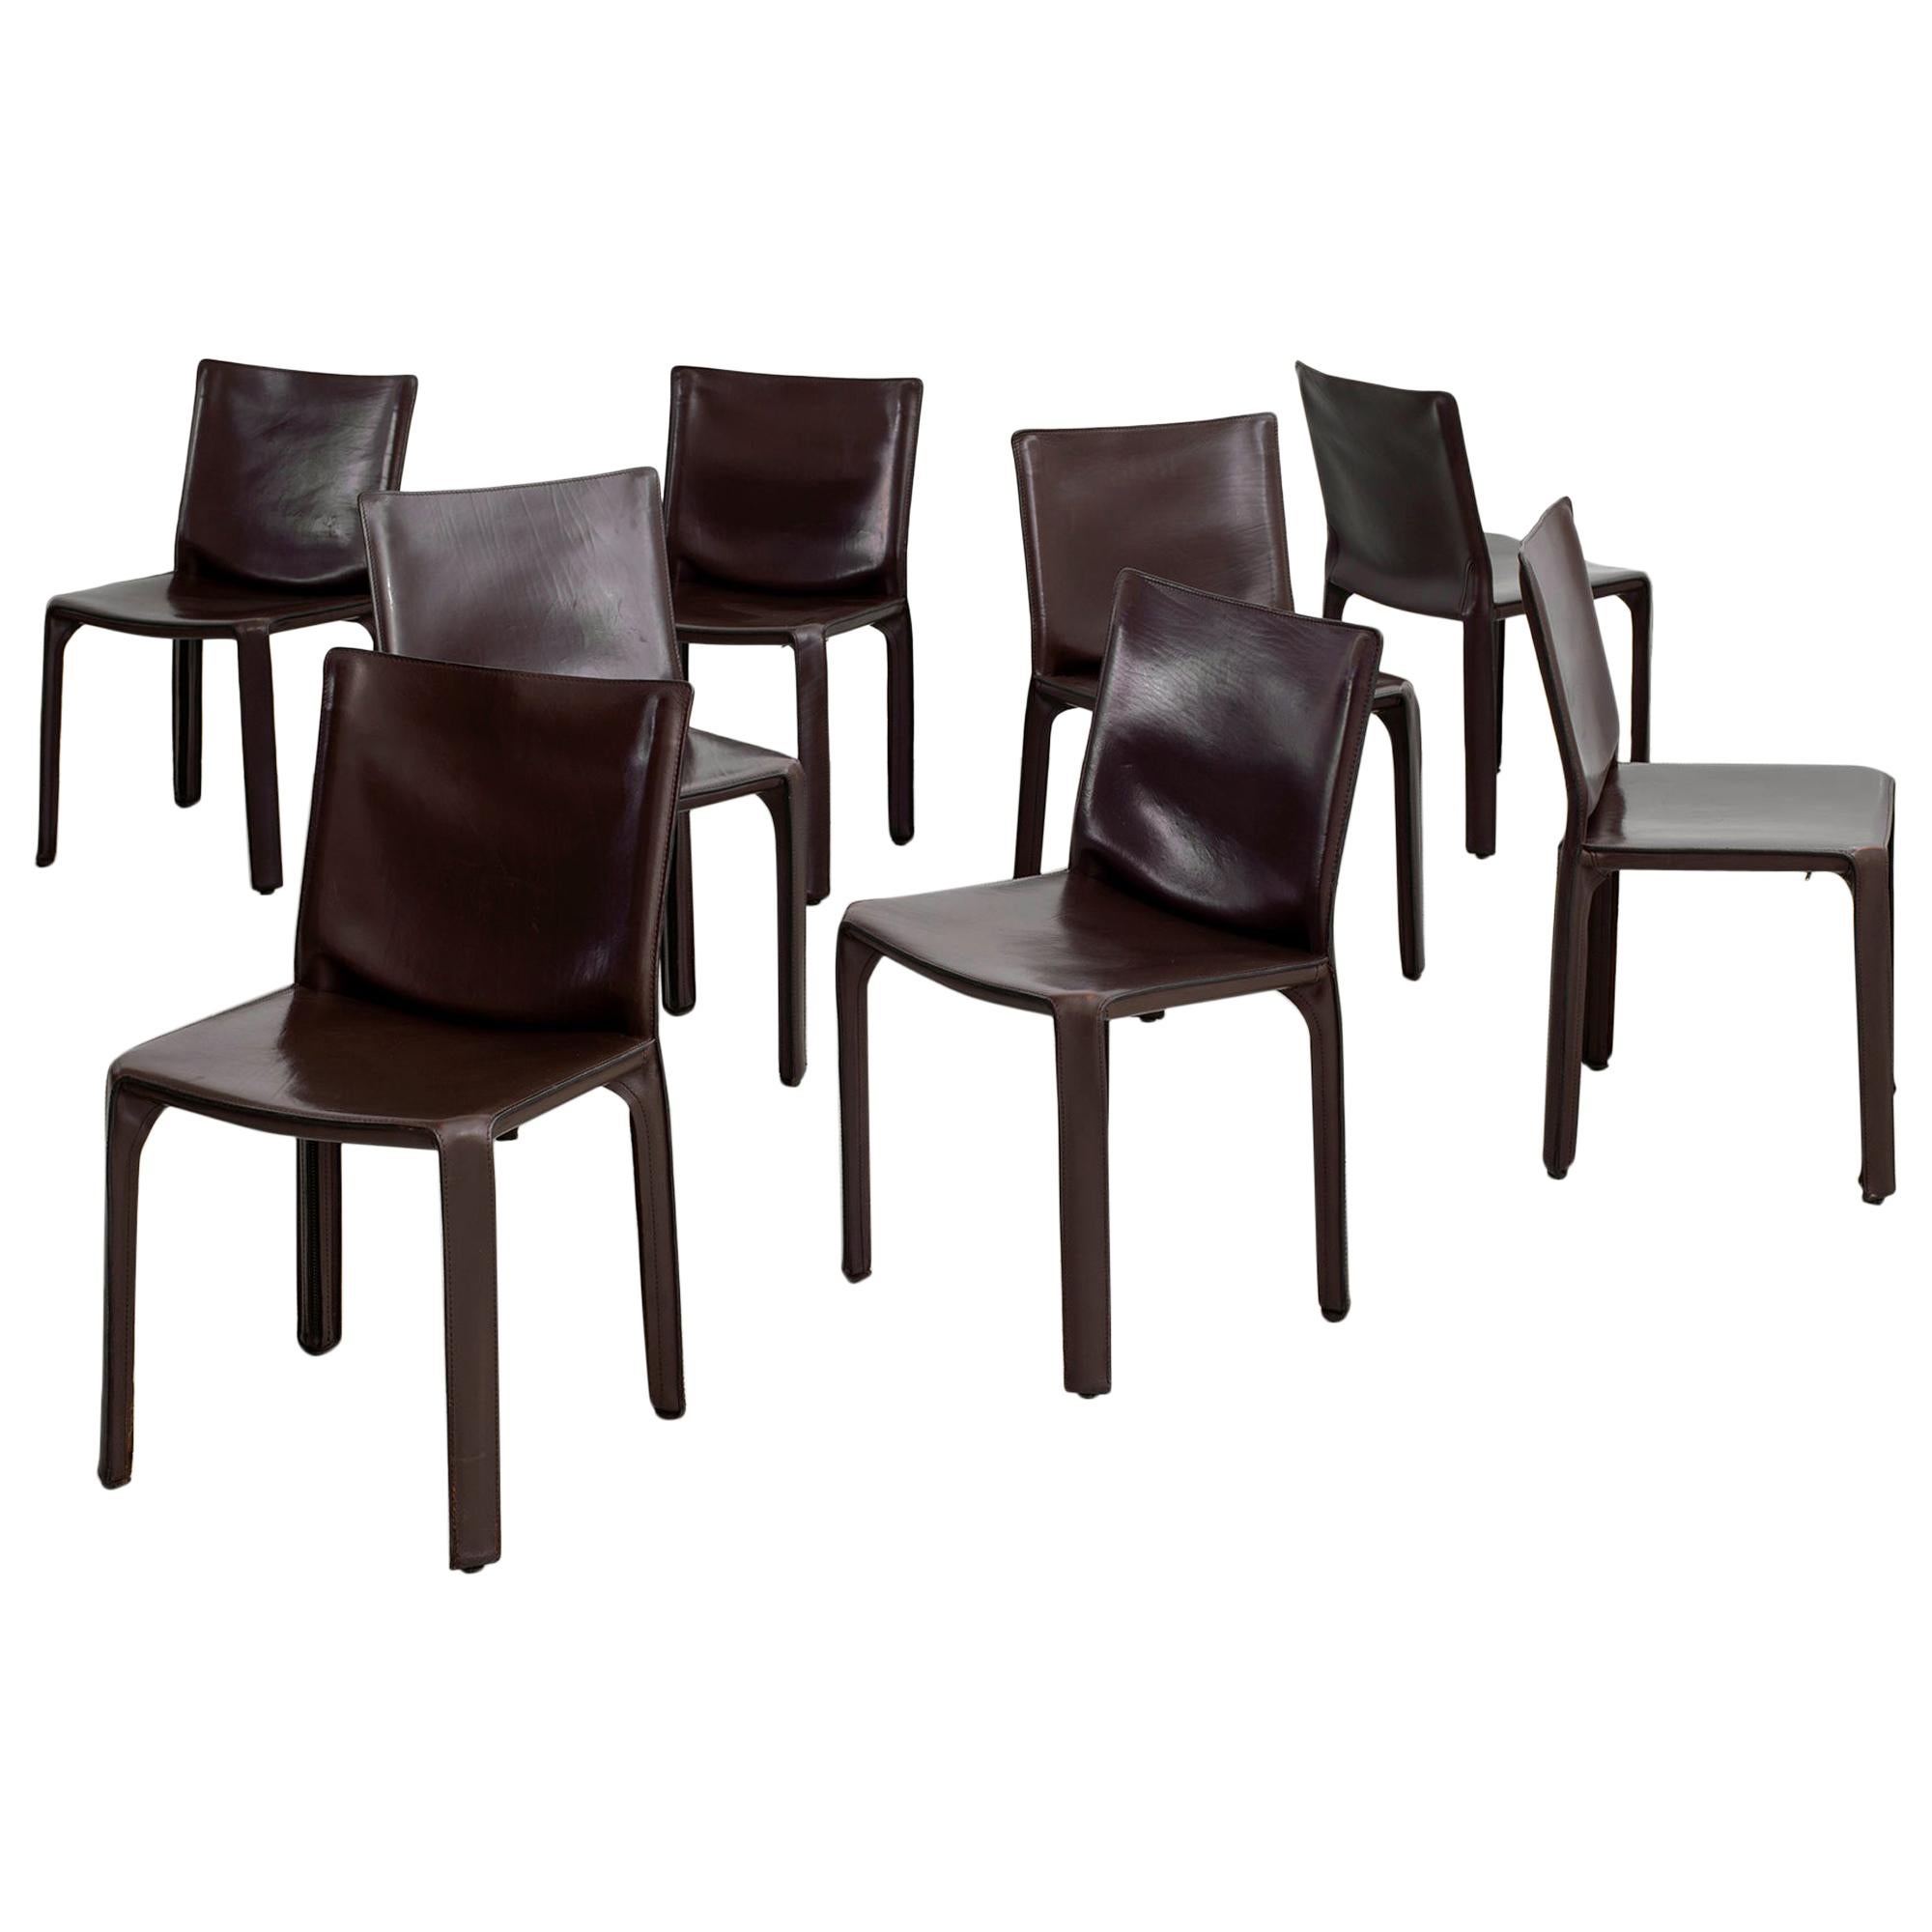 Mario Bellini "Cab" Chairs in Chocolate Leather